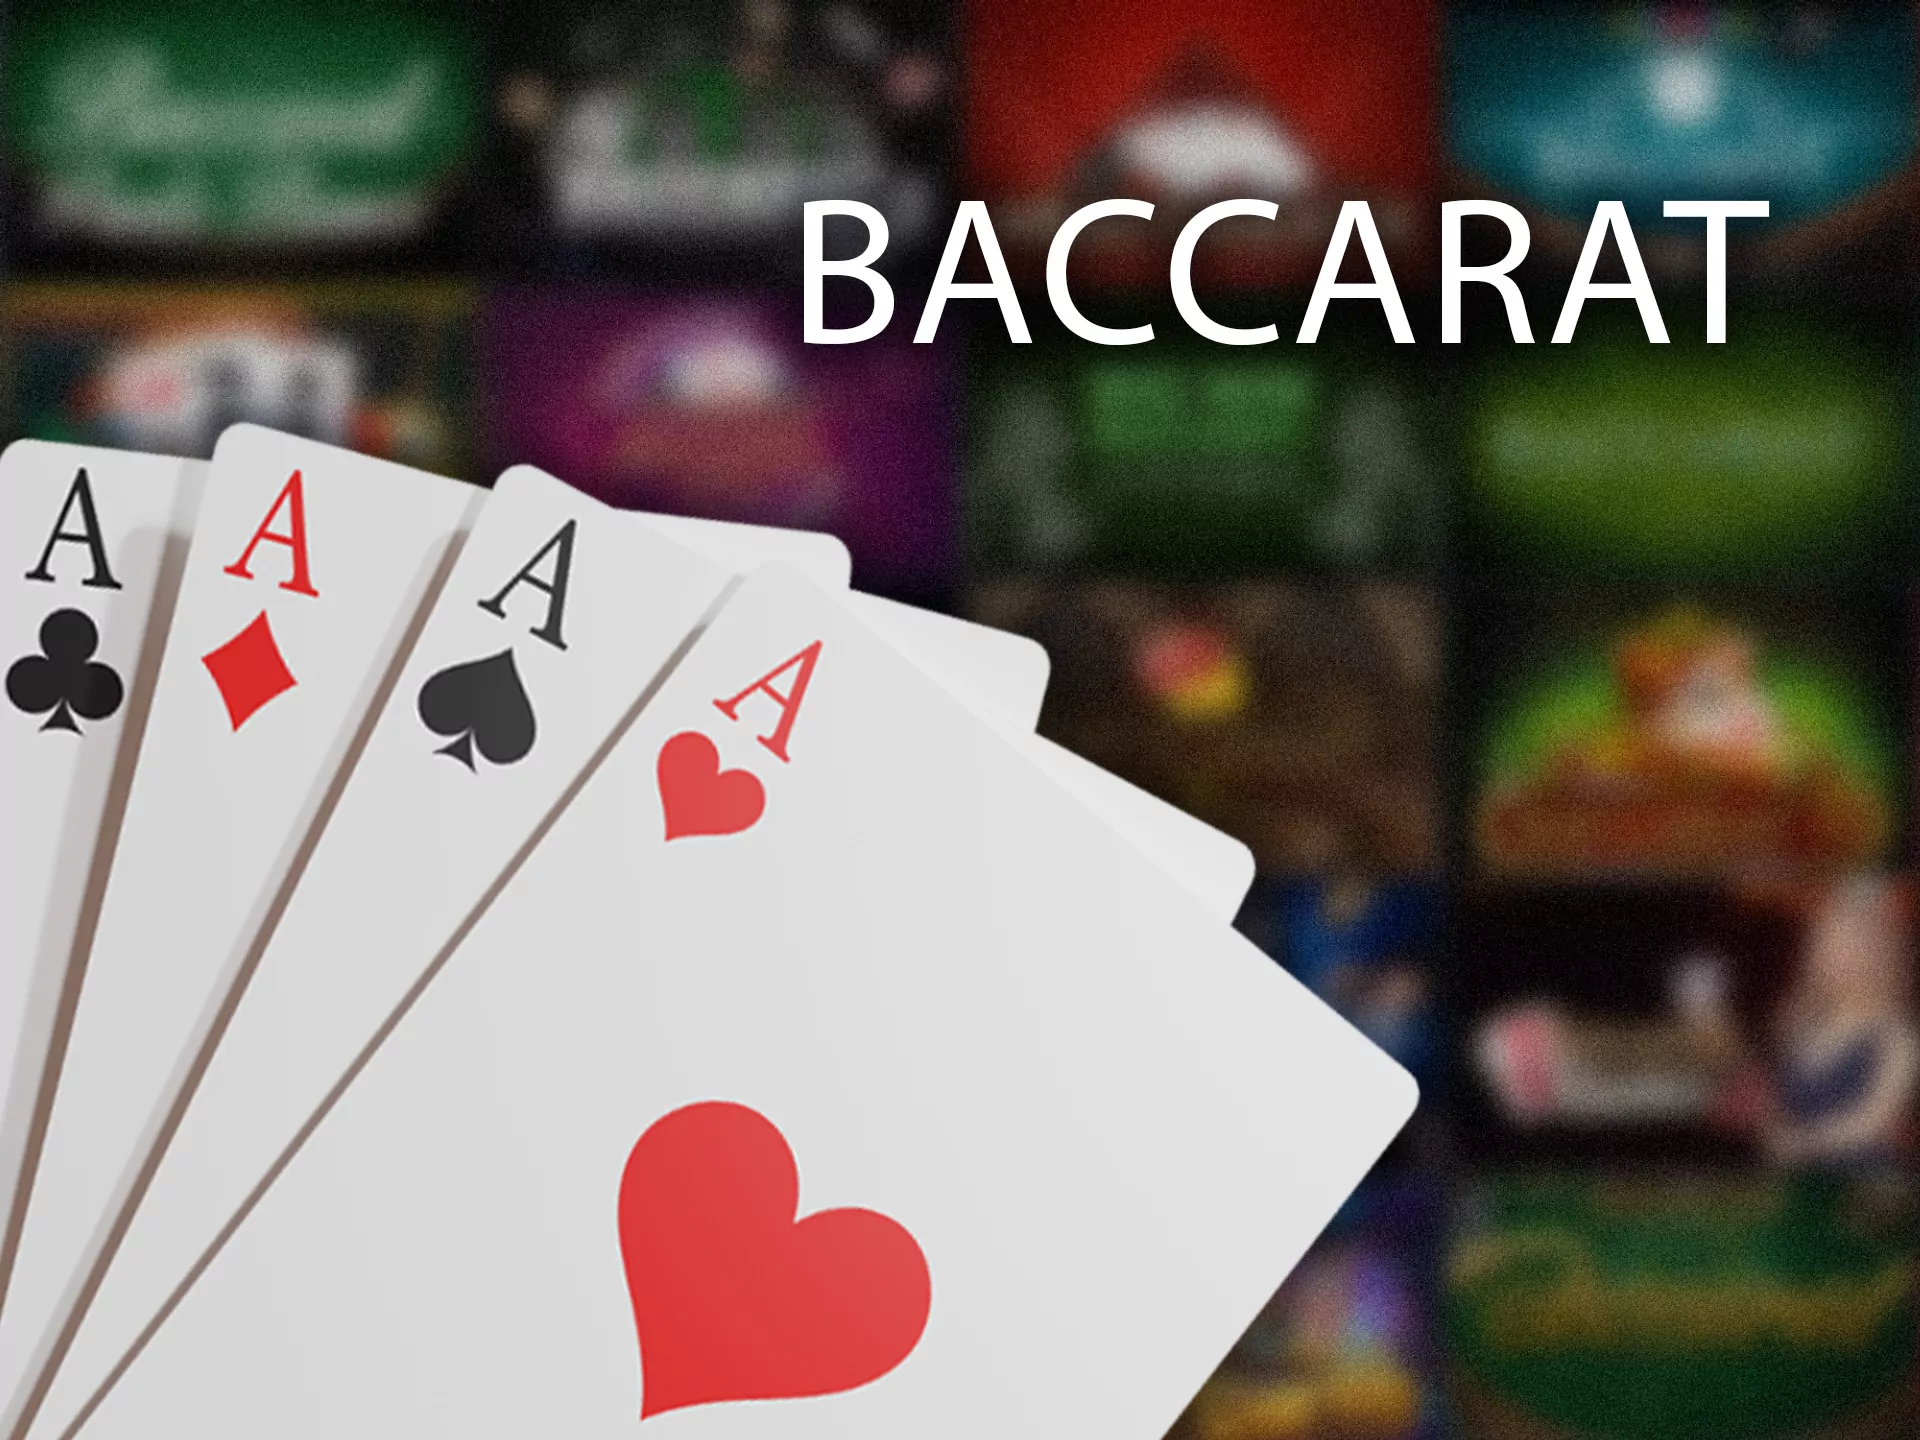 Online Baccarat is available at 1xBet in India.